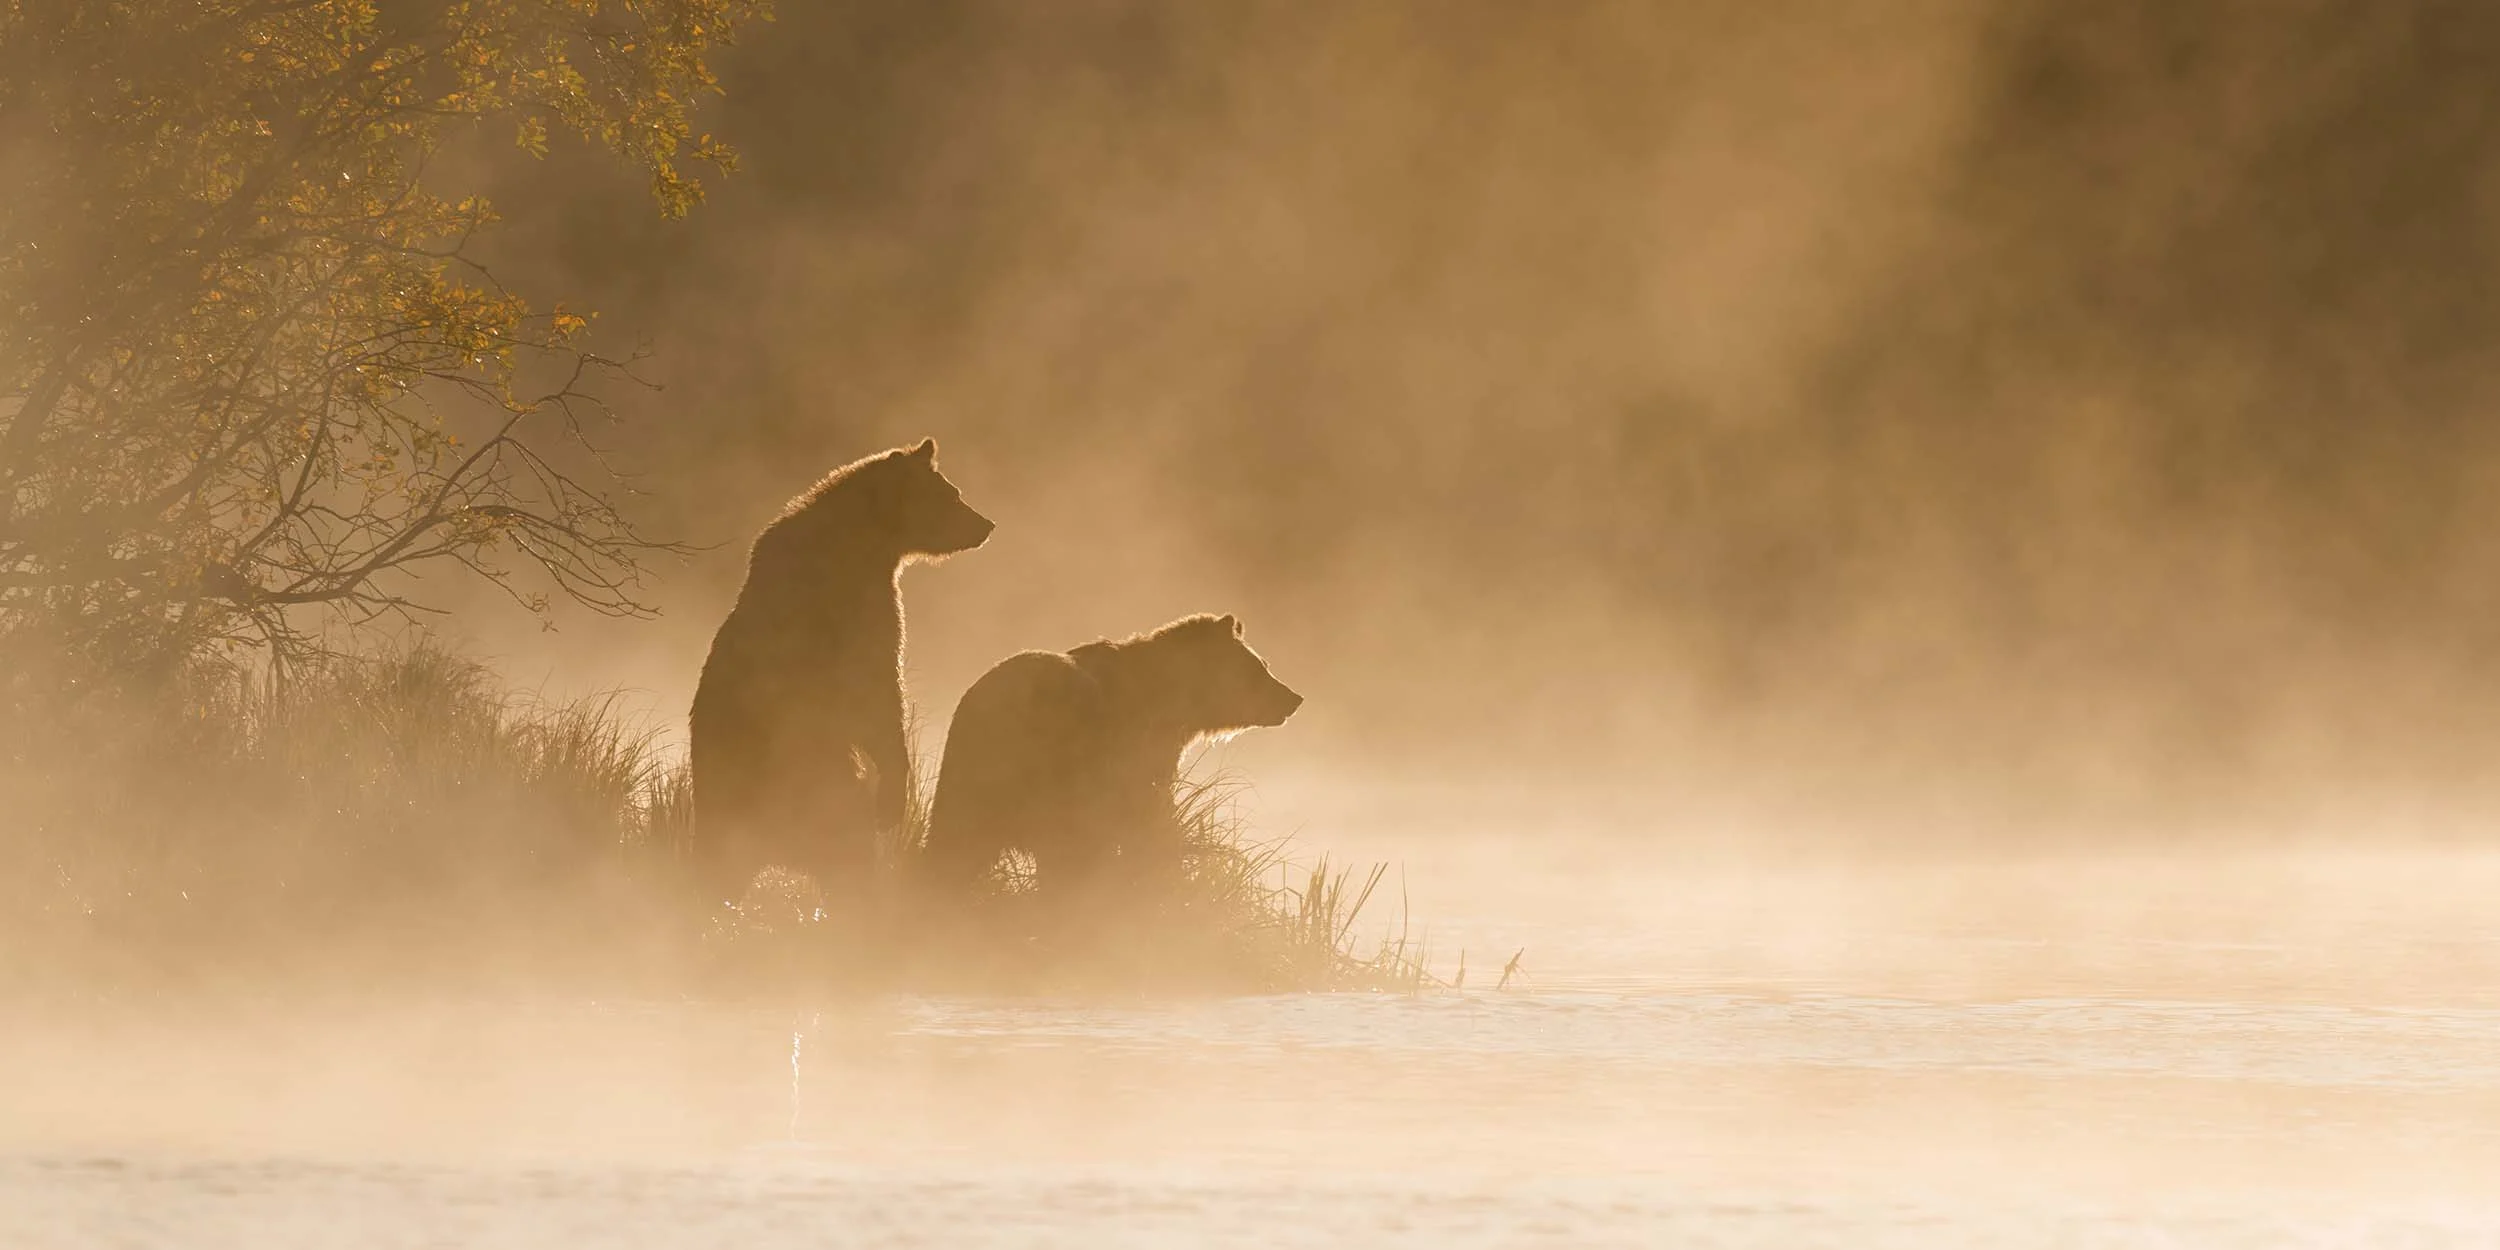 Ours grizzly en automne - Photo : Shutterstock